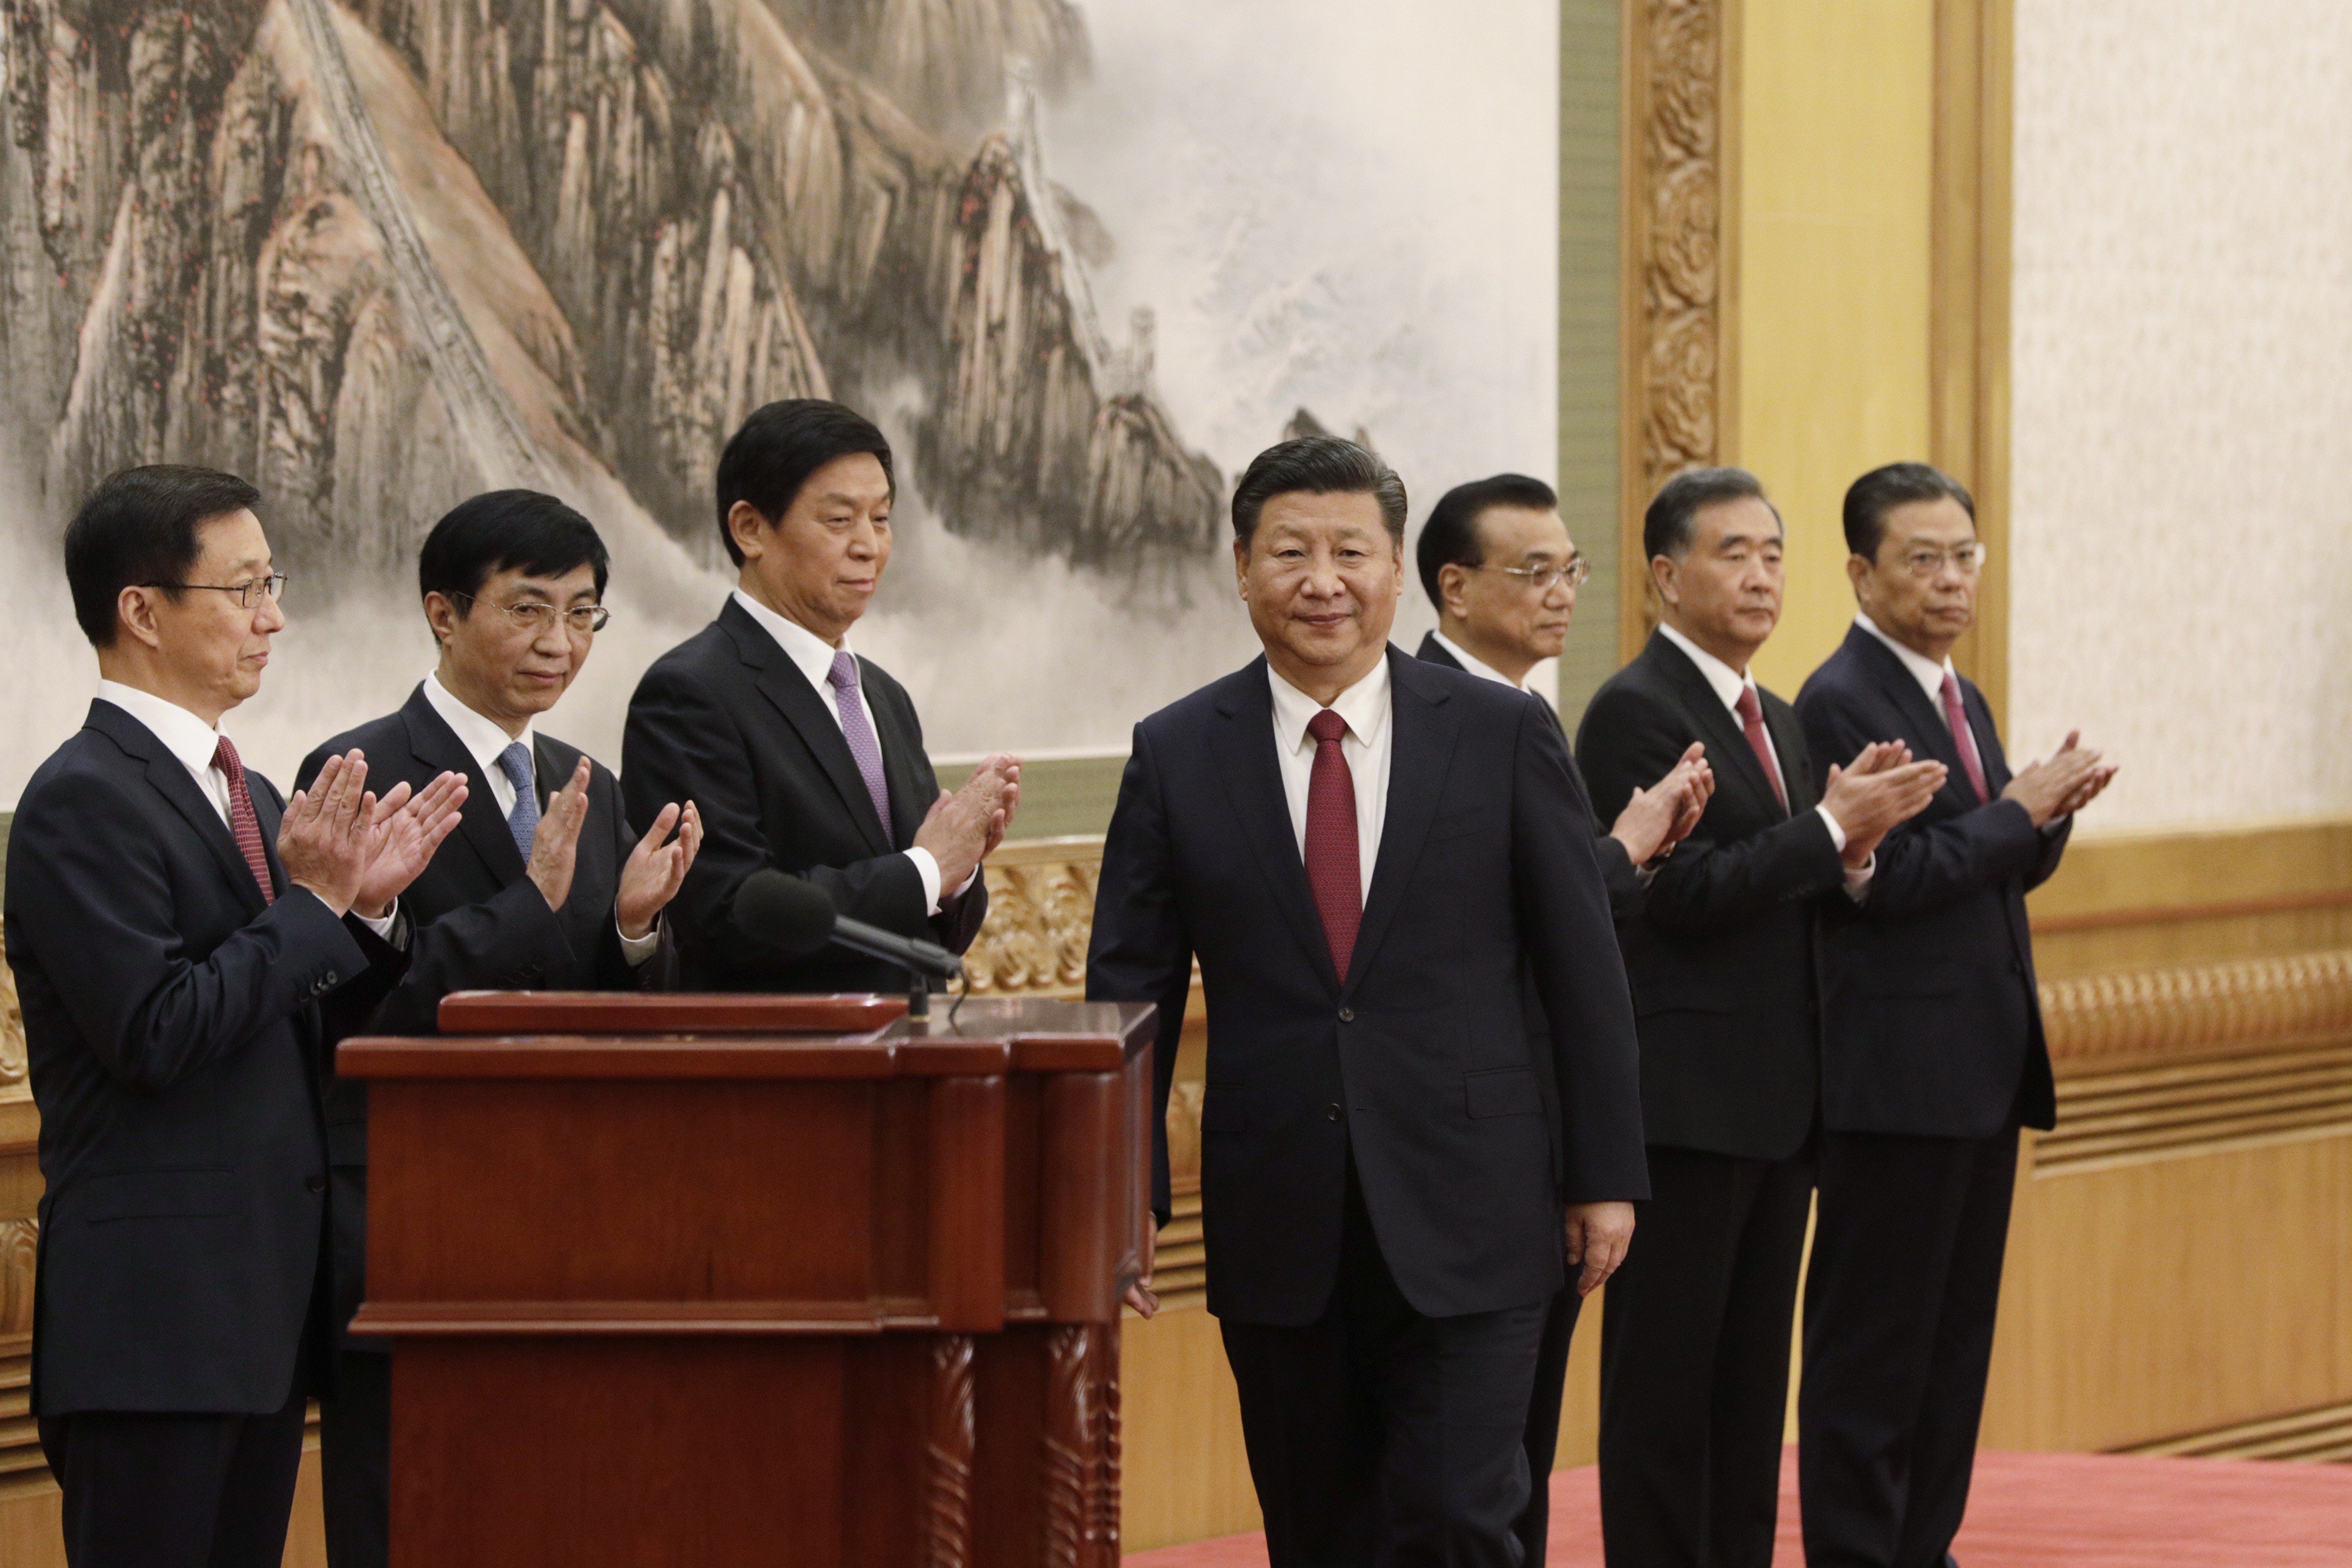 The Chinese president’s war on poverty shines through newly released film Hold Your Hands. It won’t be the last film about Xi Jinping Thought, enshrined in the Communist Party’s constitution last week. Photo: Bloomberg